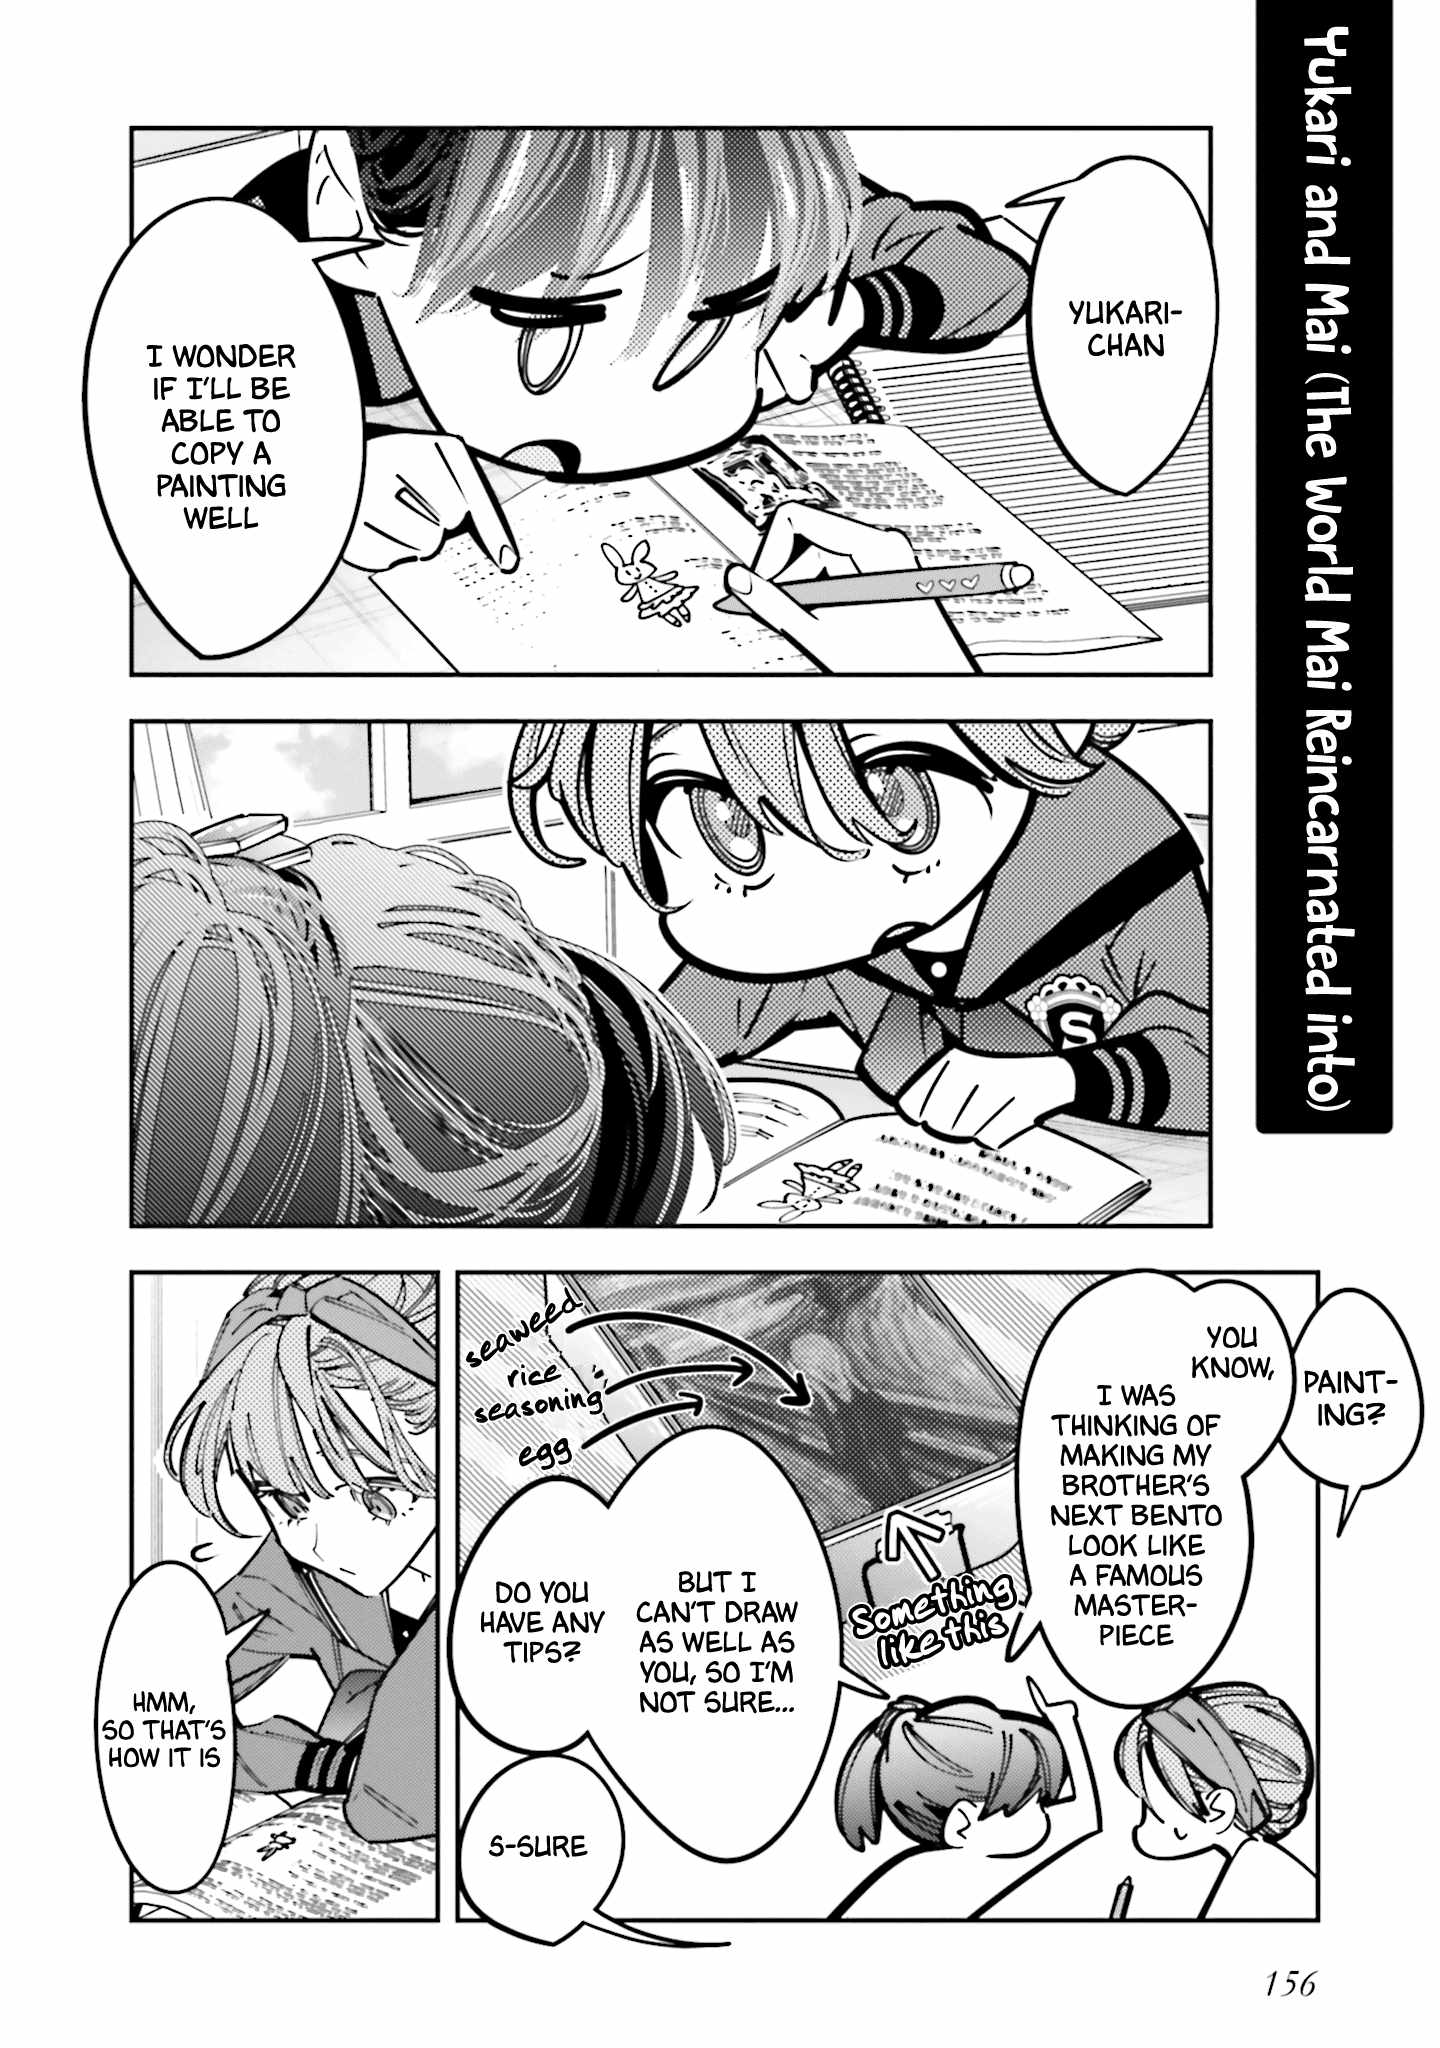 I Reincarnated as the Little Sister of a Death Game Manga's Murd3r Mastermind and Failed Chapter 13-5-eng-li - Page 17